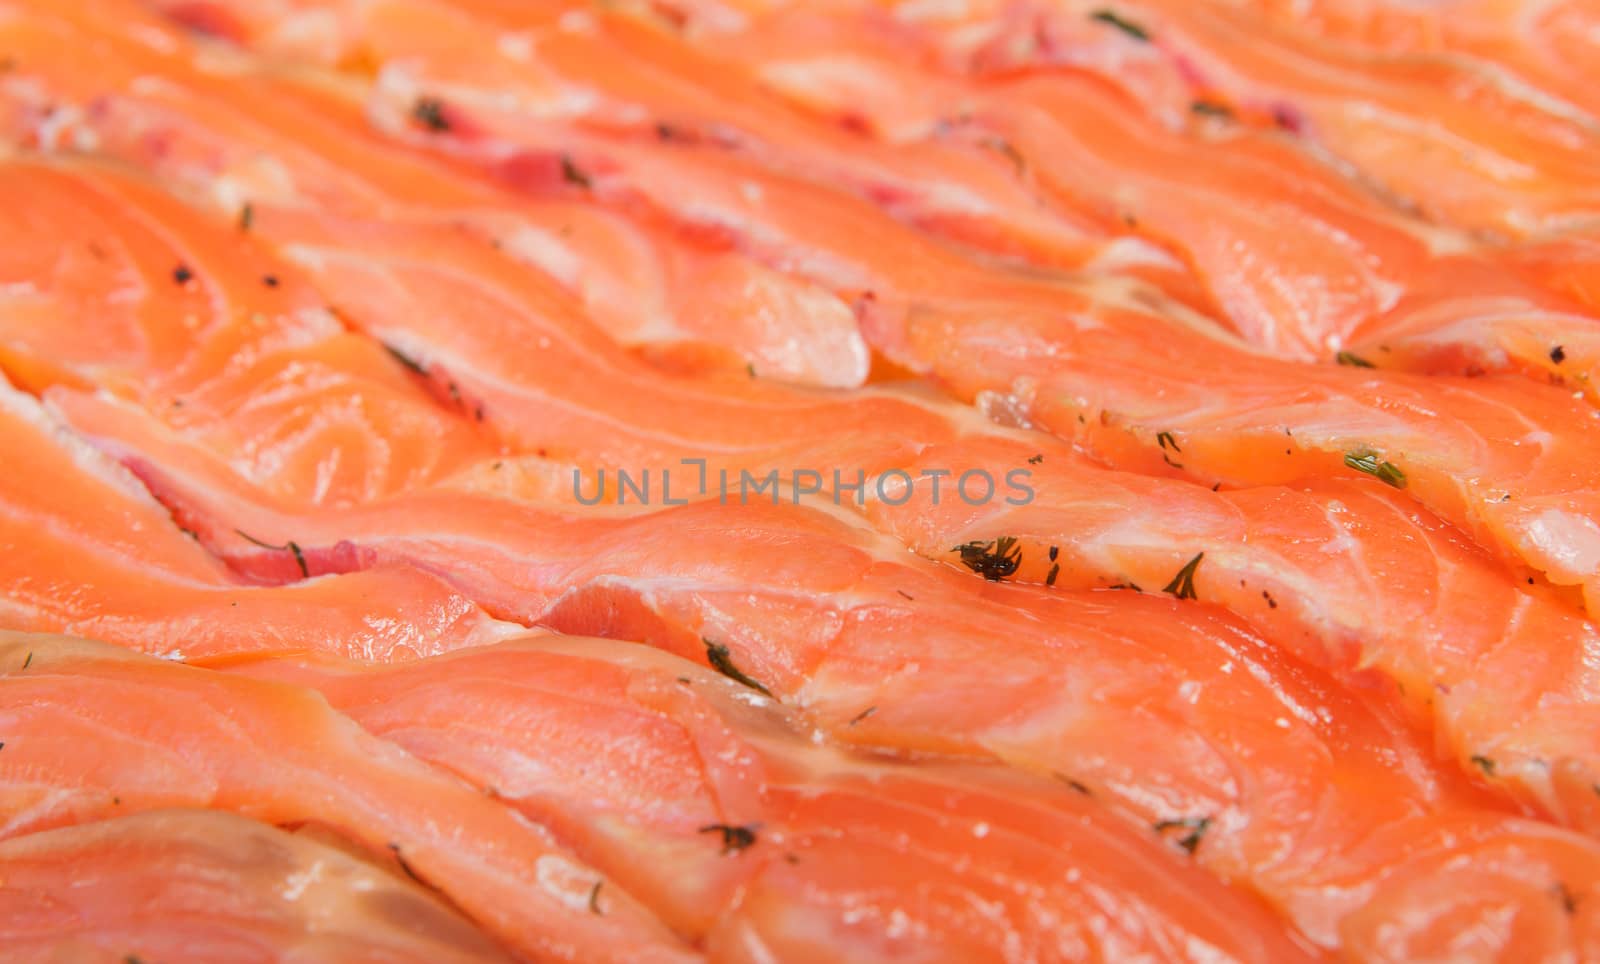 Delicious gravlux - thin slices of the trout